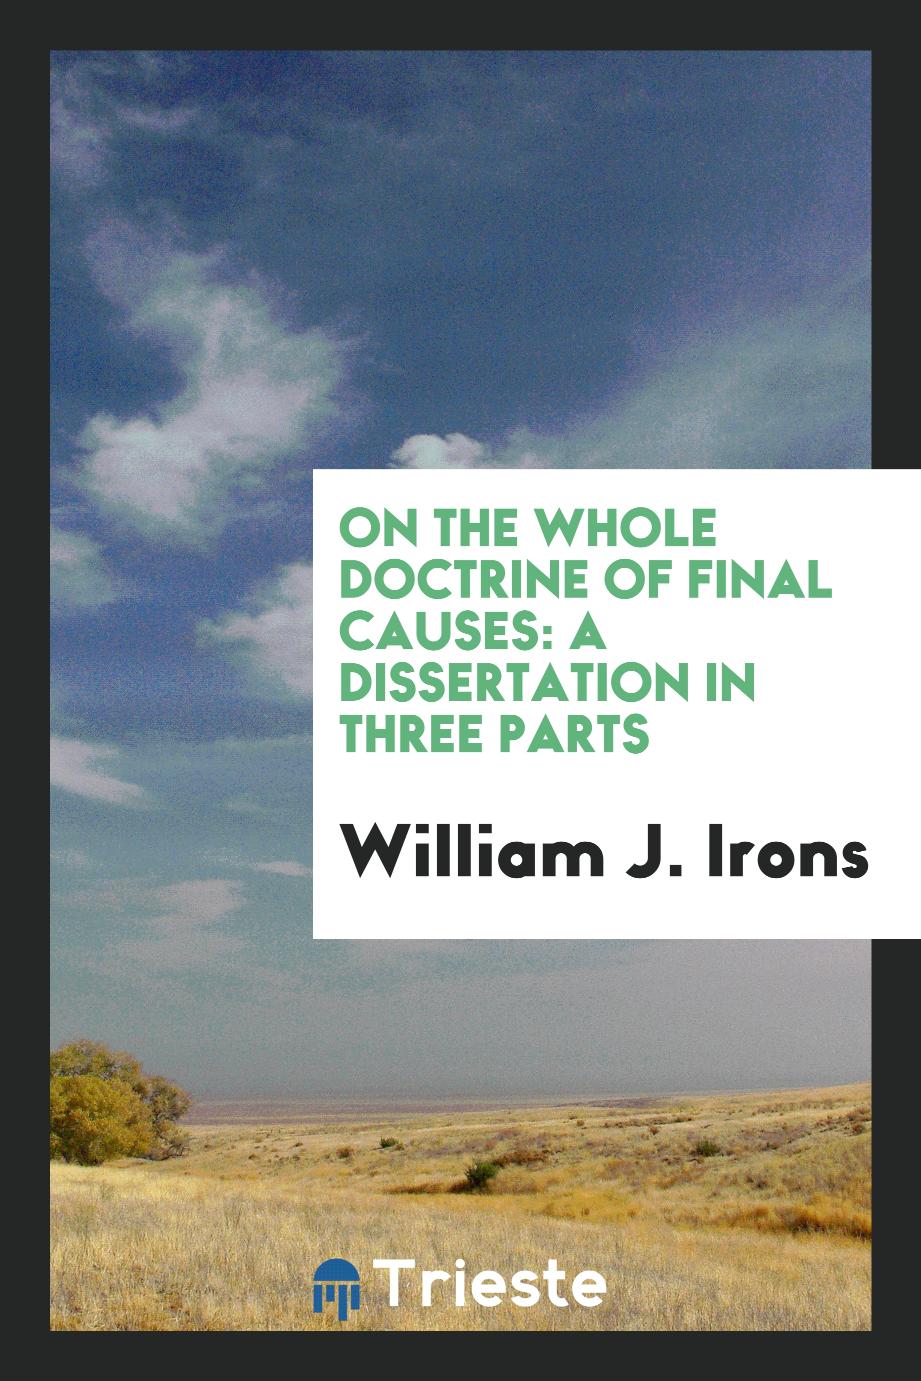 On the Whole Doctrine of Final Causes: A Dissertation in Three Parts